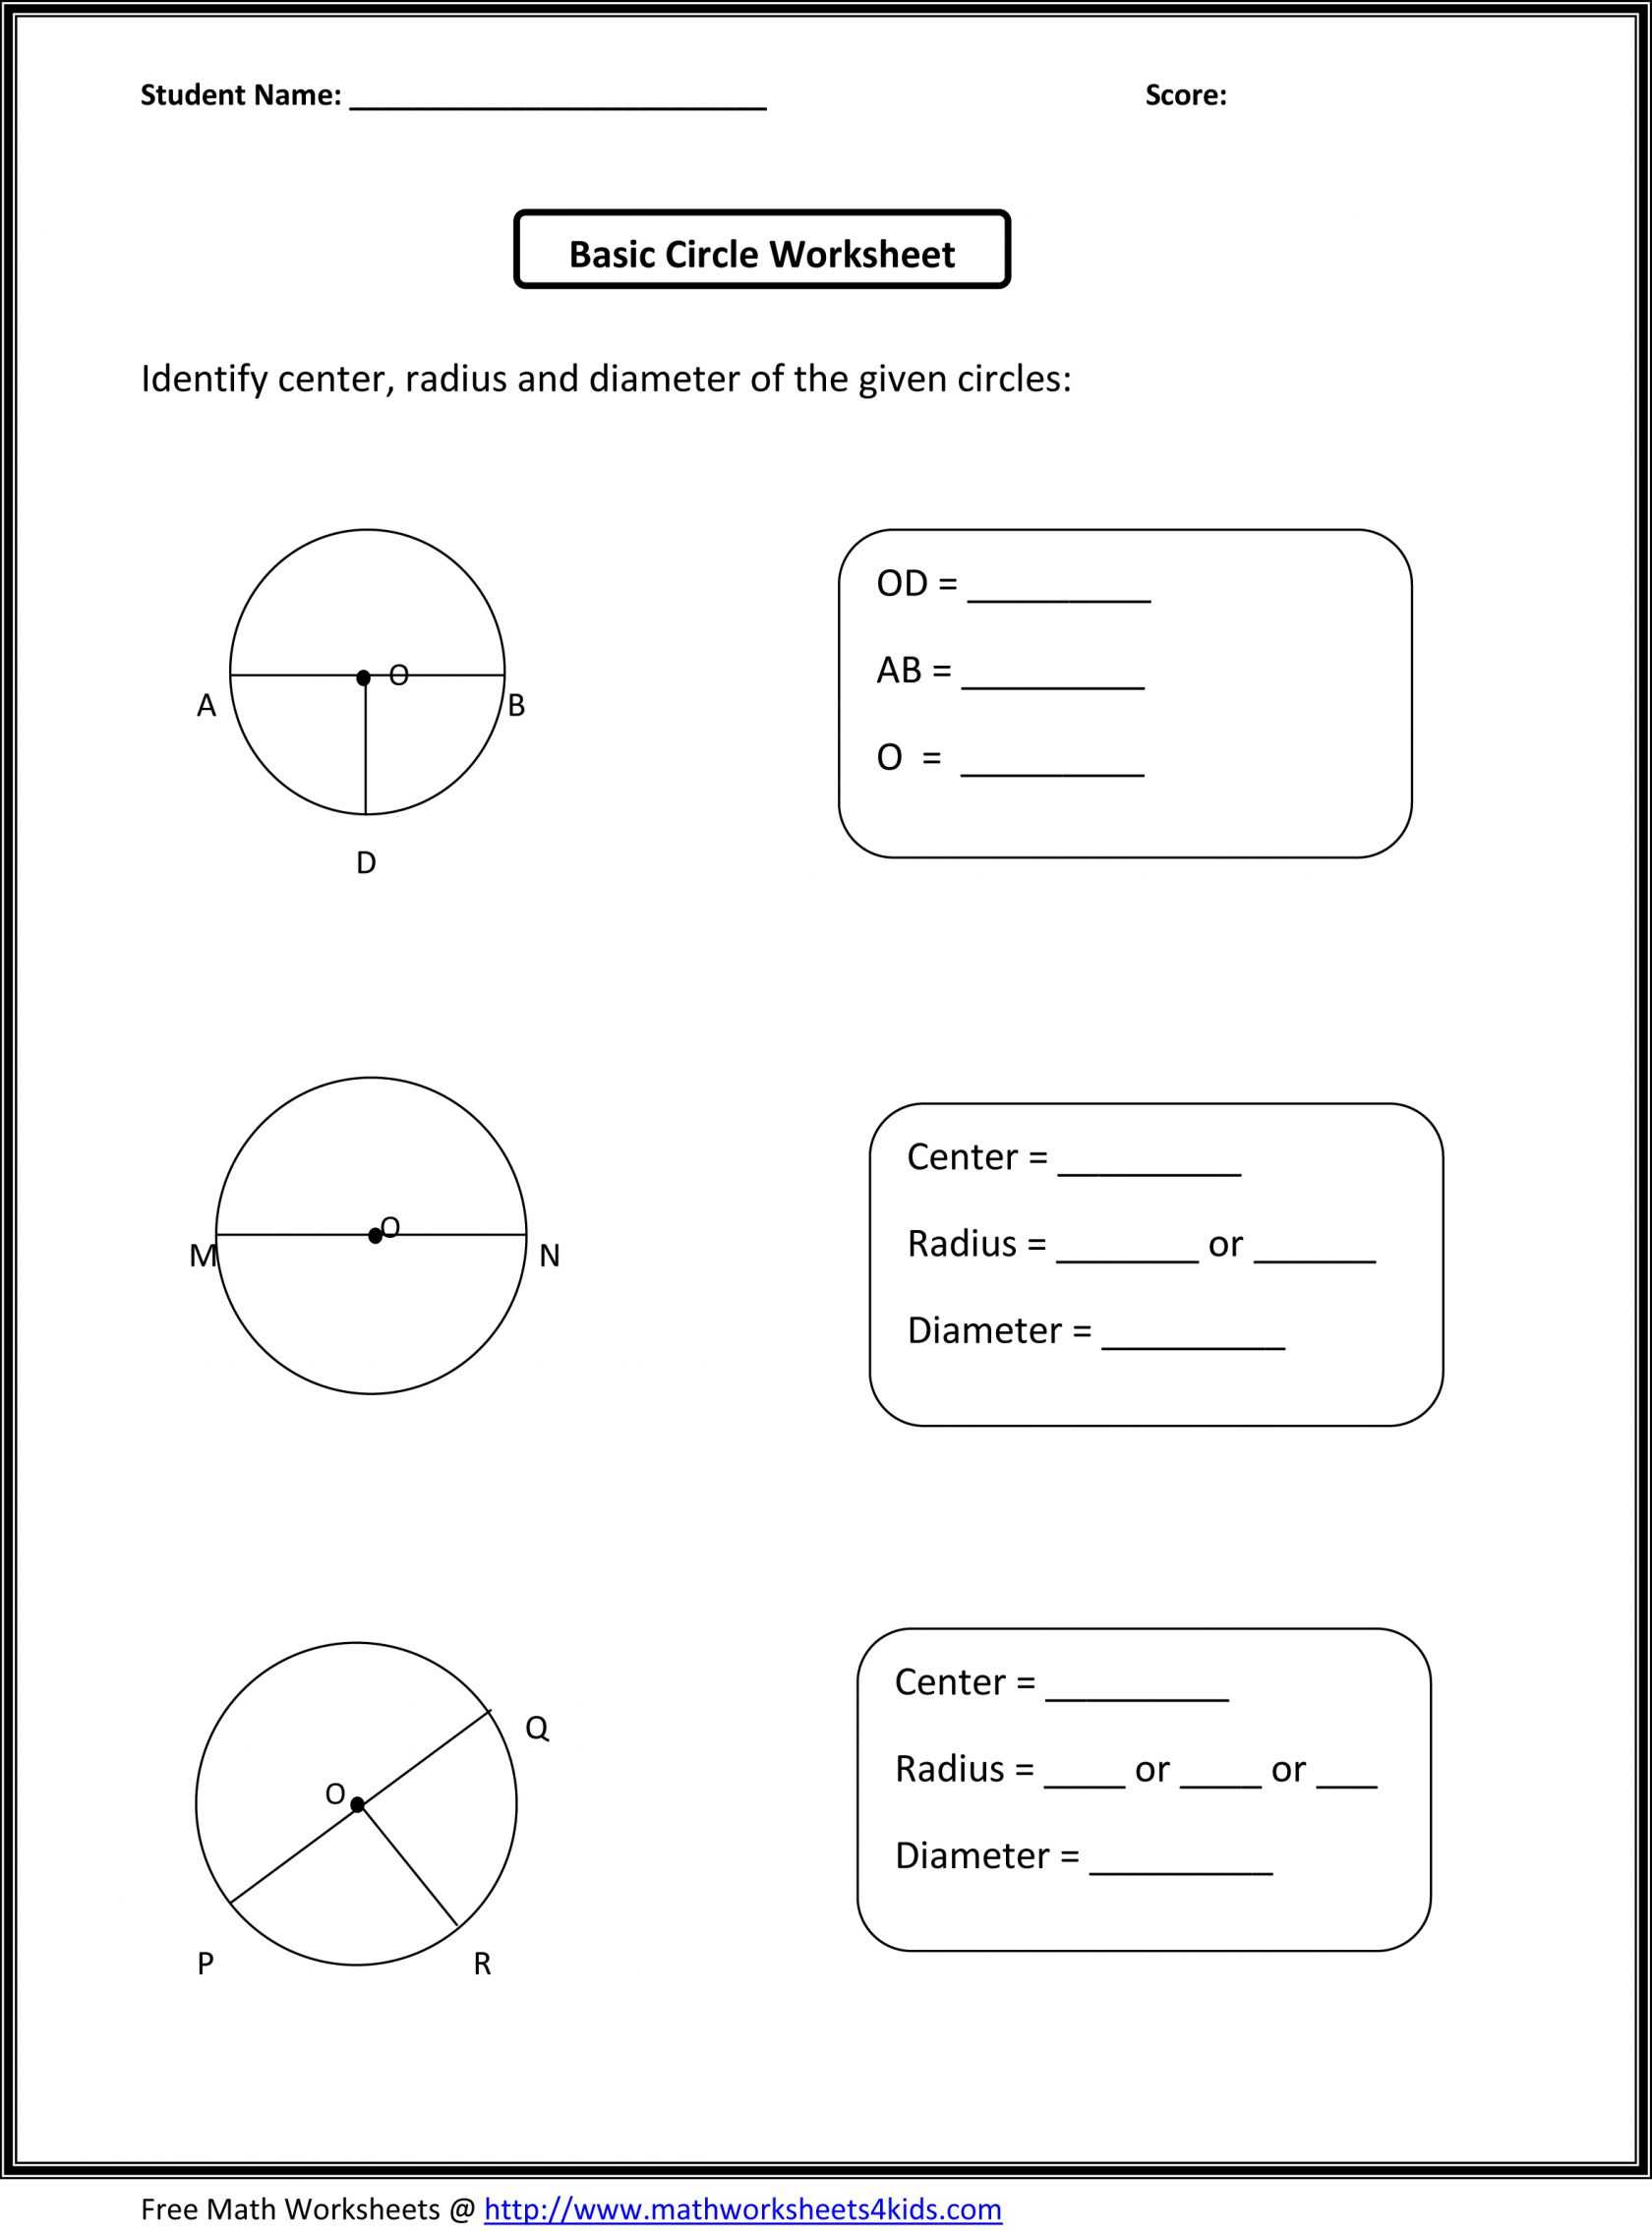 Cause and Effect Worksheets 2nd Grade together with 2nd Grade Math Mon Core Worksheets